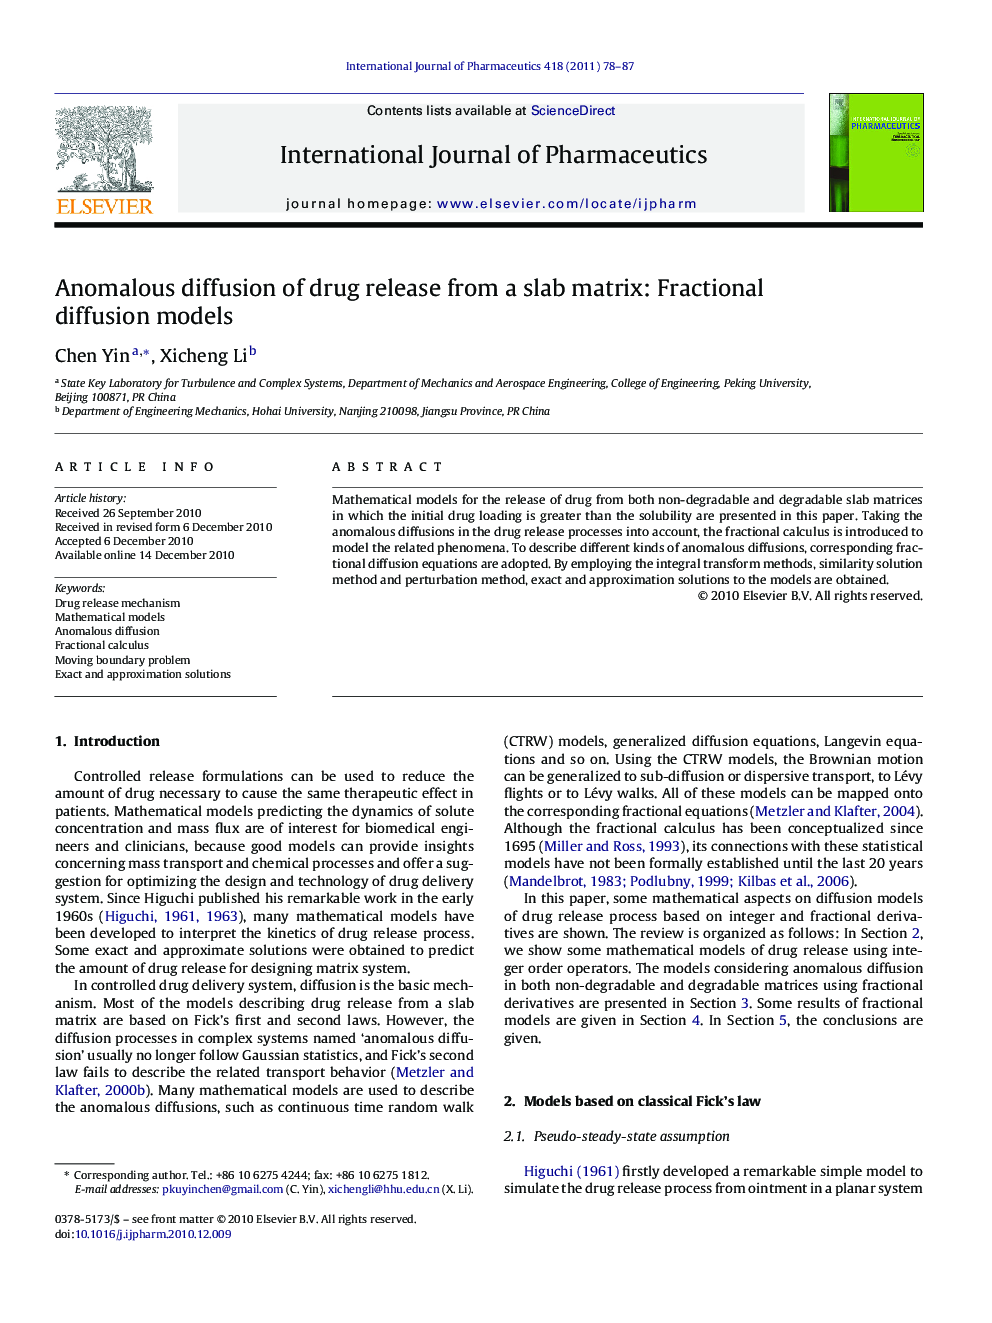 Anomalous diffusion of drug release from a slab matrix: Fractional diffusion models